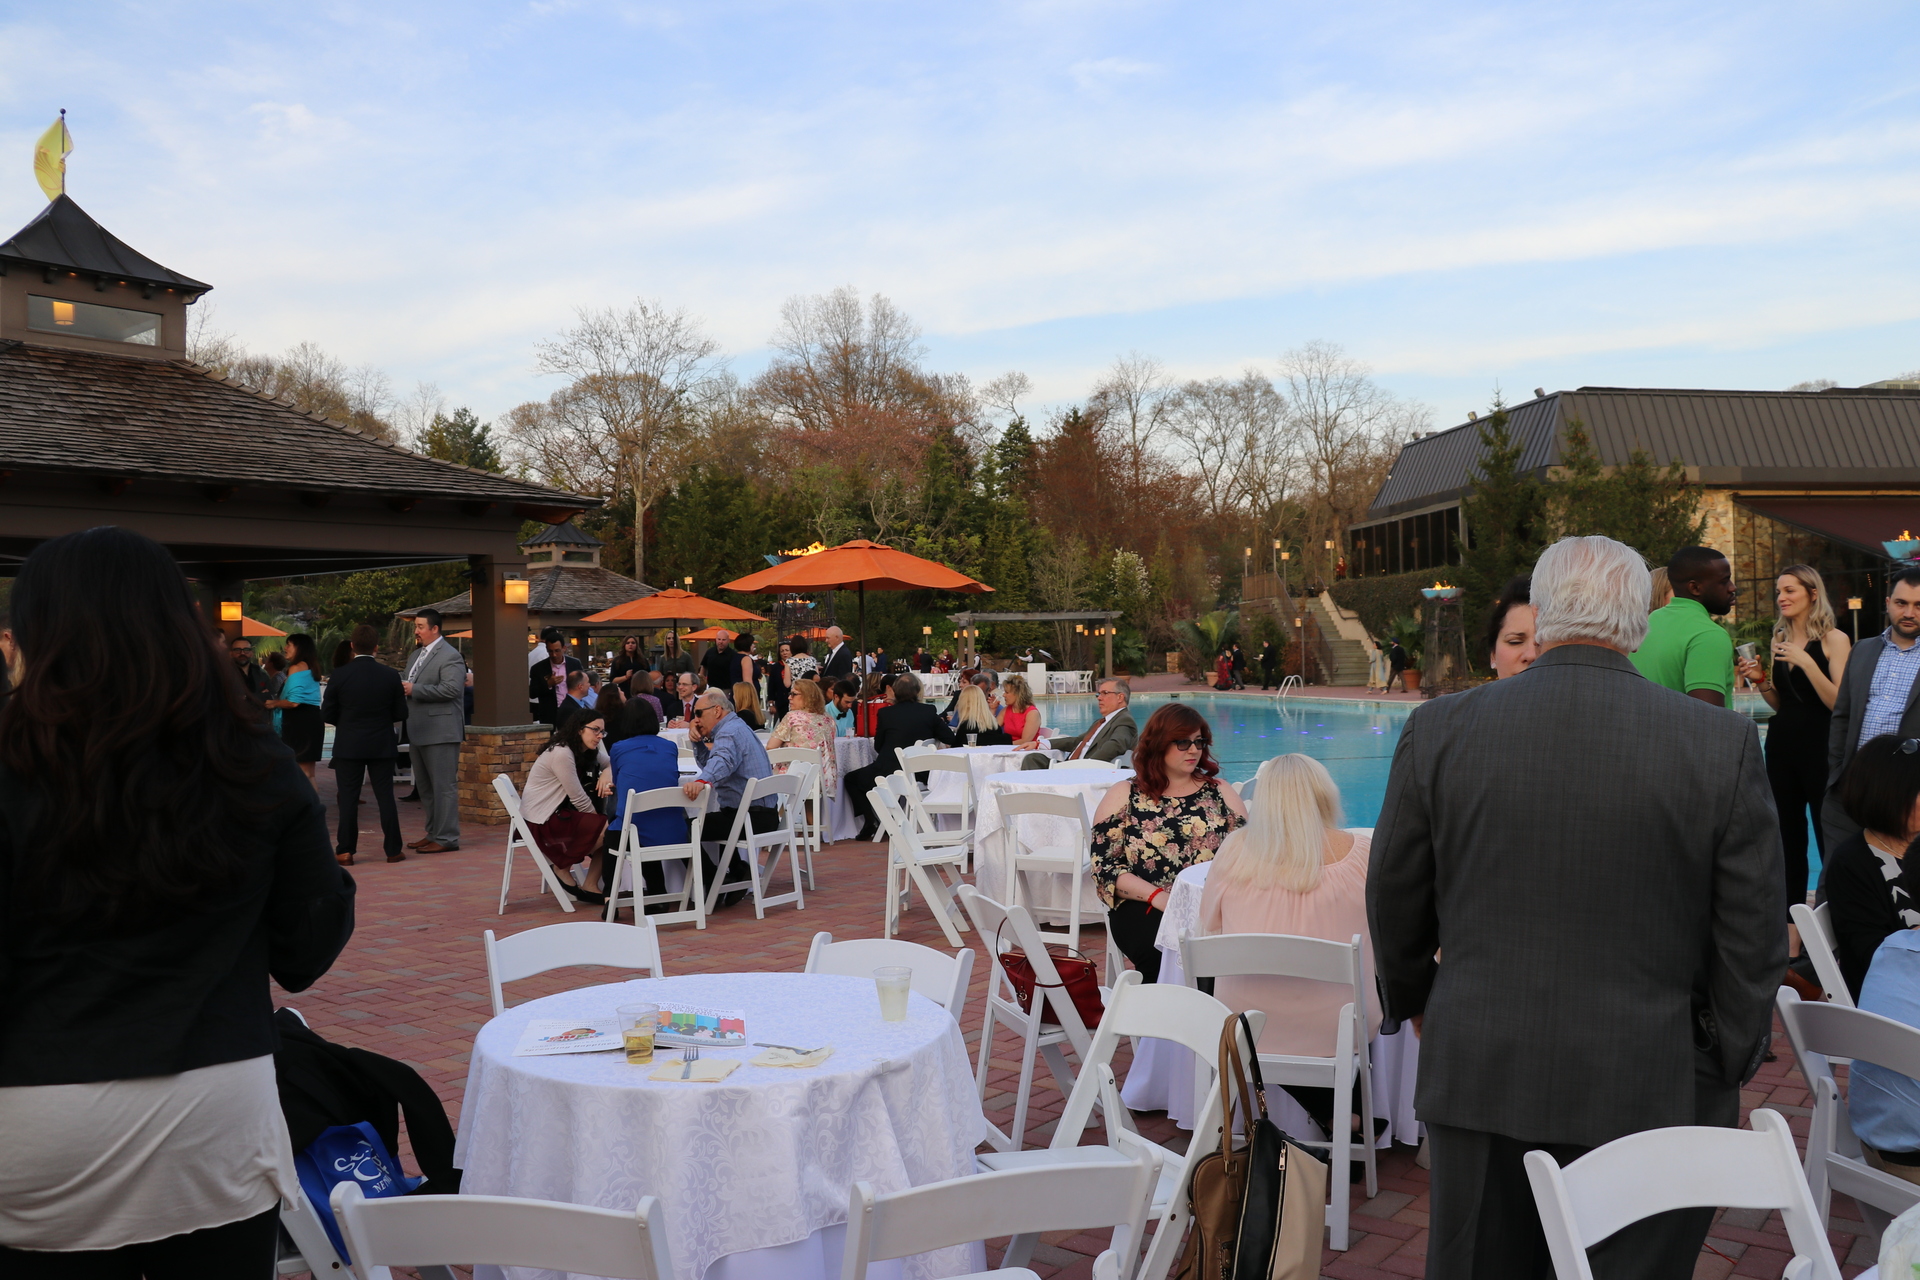 People mingling during the event at Crest Hollow Country Club.